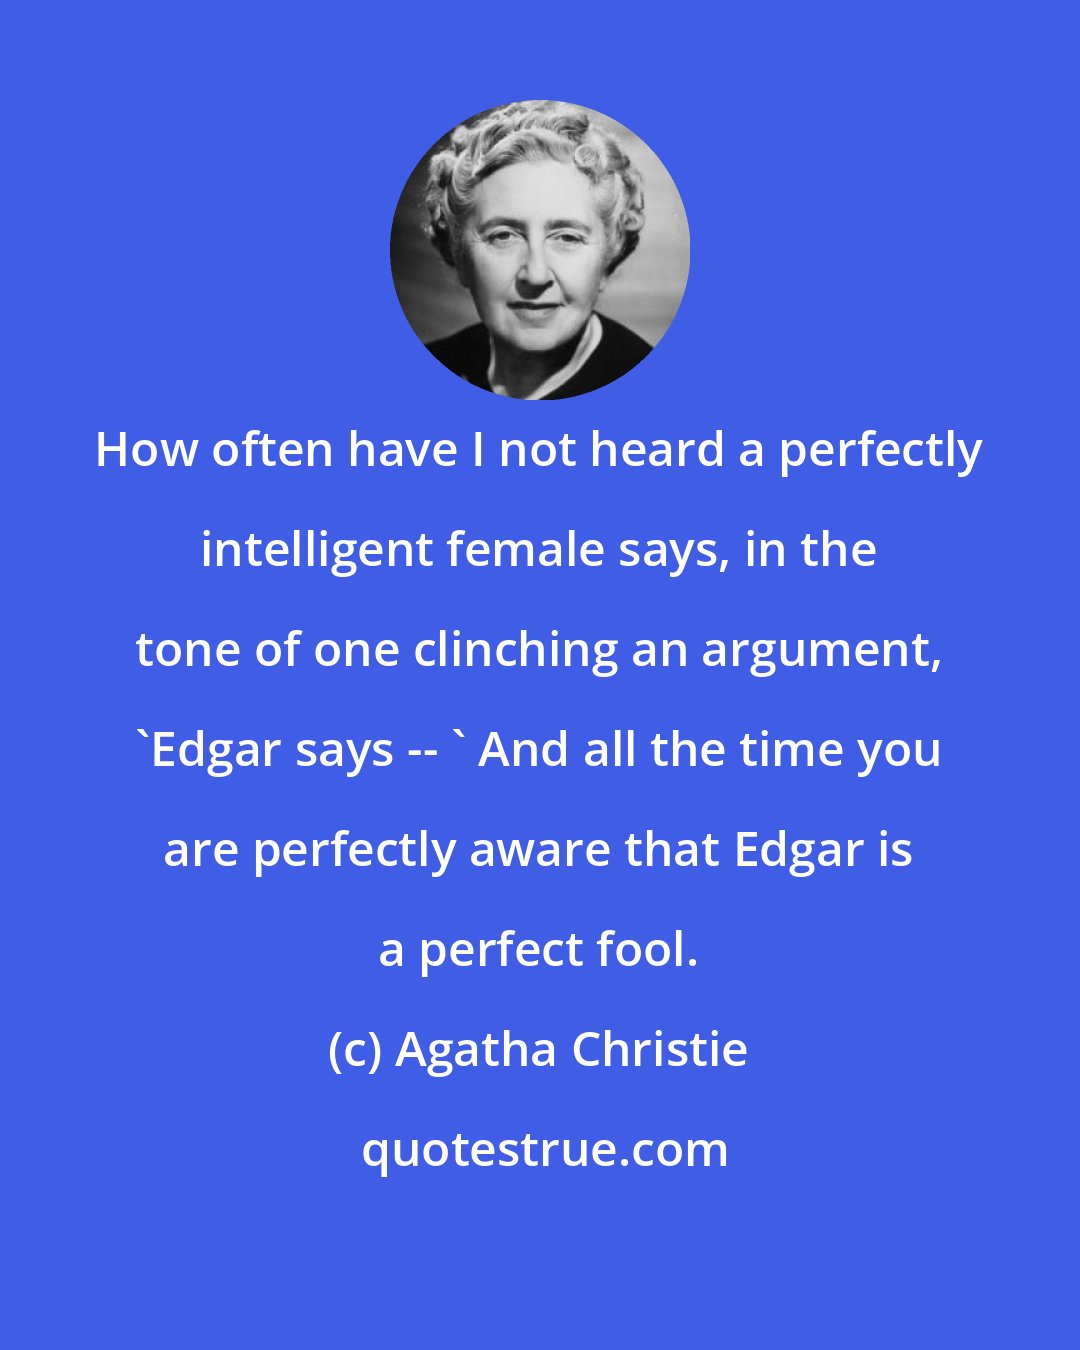 Agatha Christie: How often have I not heard a perfectly intelligent female says, in the tone of one clinching an argument, 'Edgar says -- ' And all the time you are perfectly aware that Edgar is a perfect fool.